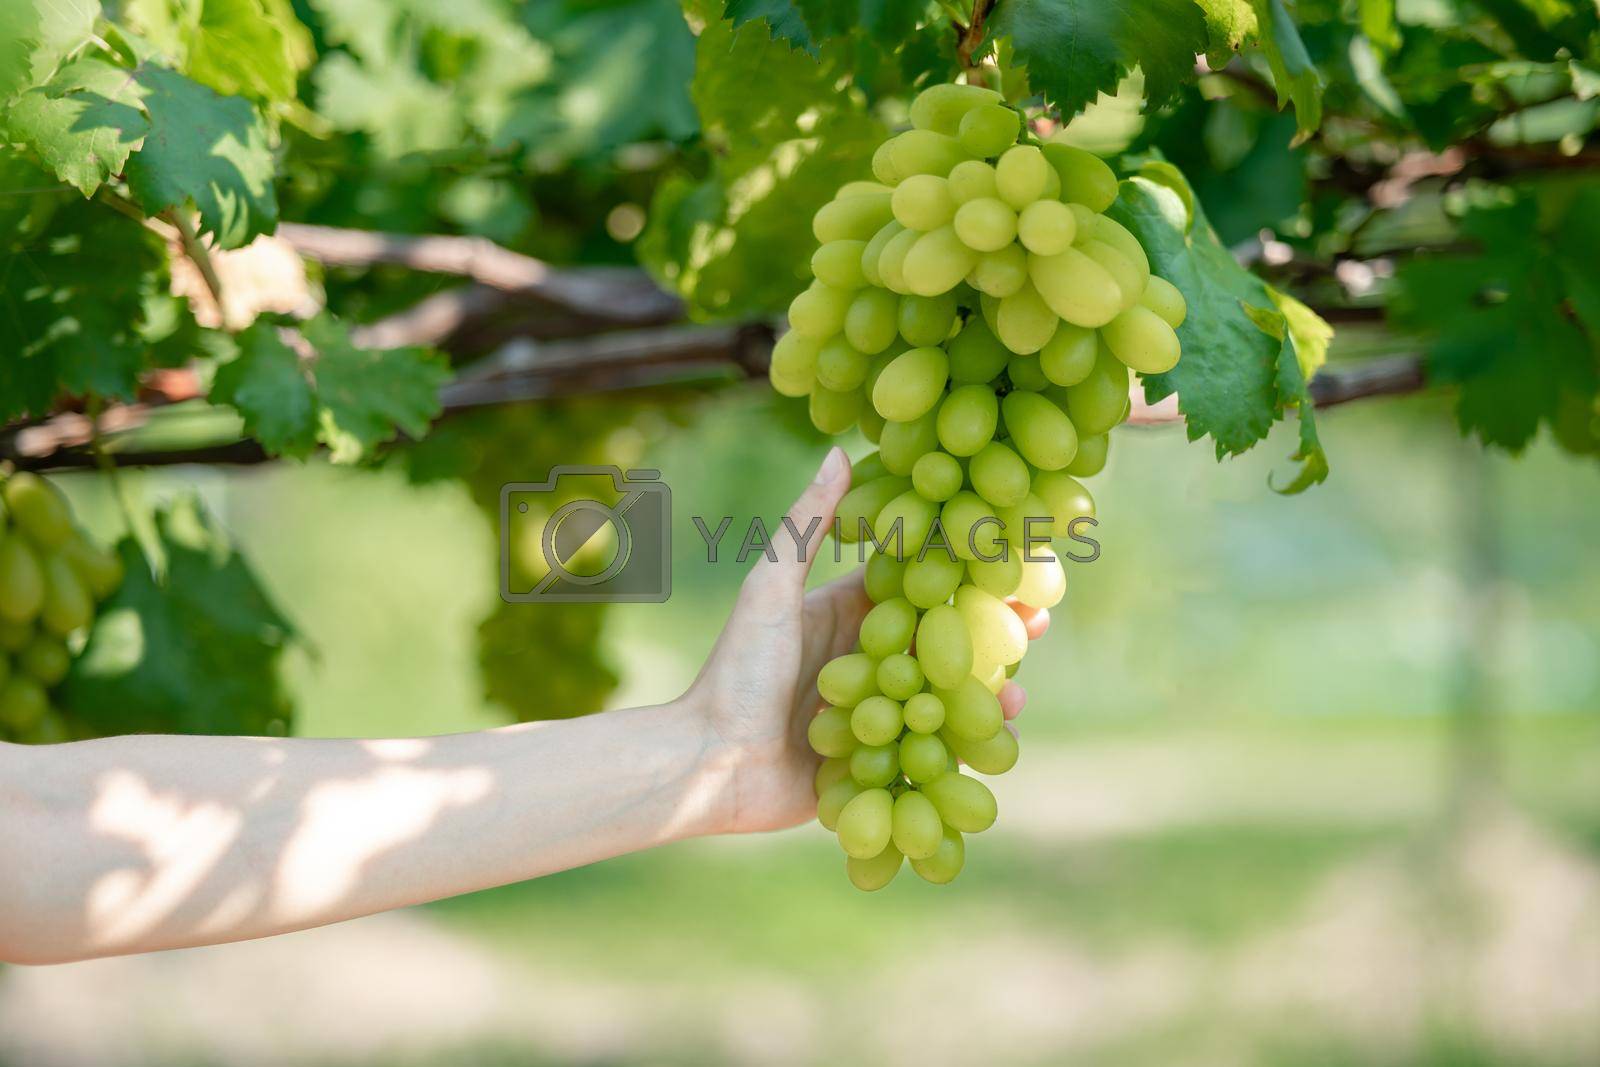 Royalty free image of Woman hand harvesting grapes outdoors in vineyard. by sirawit99